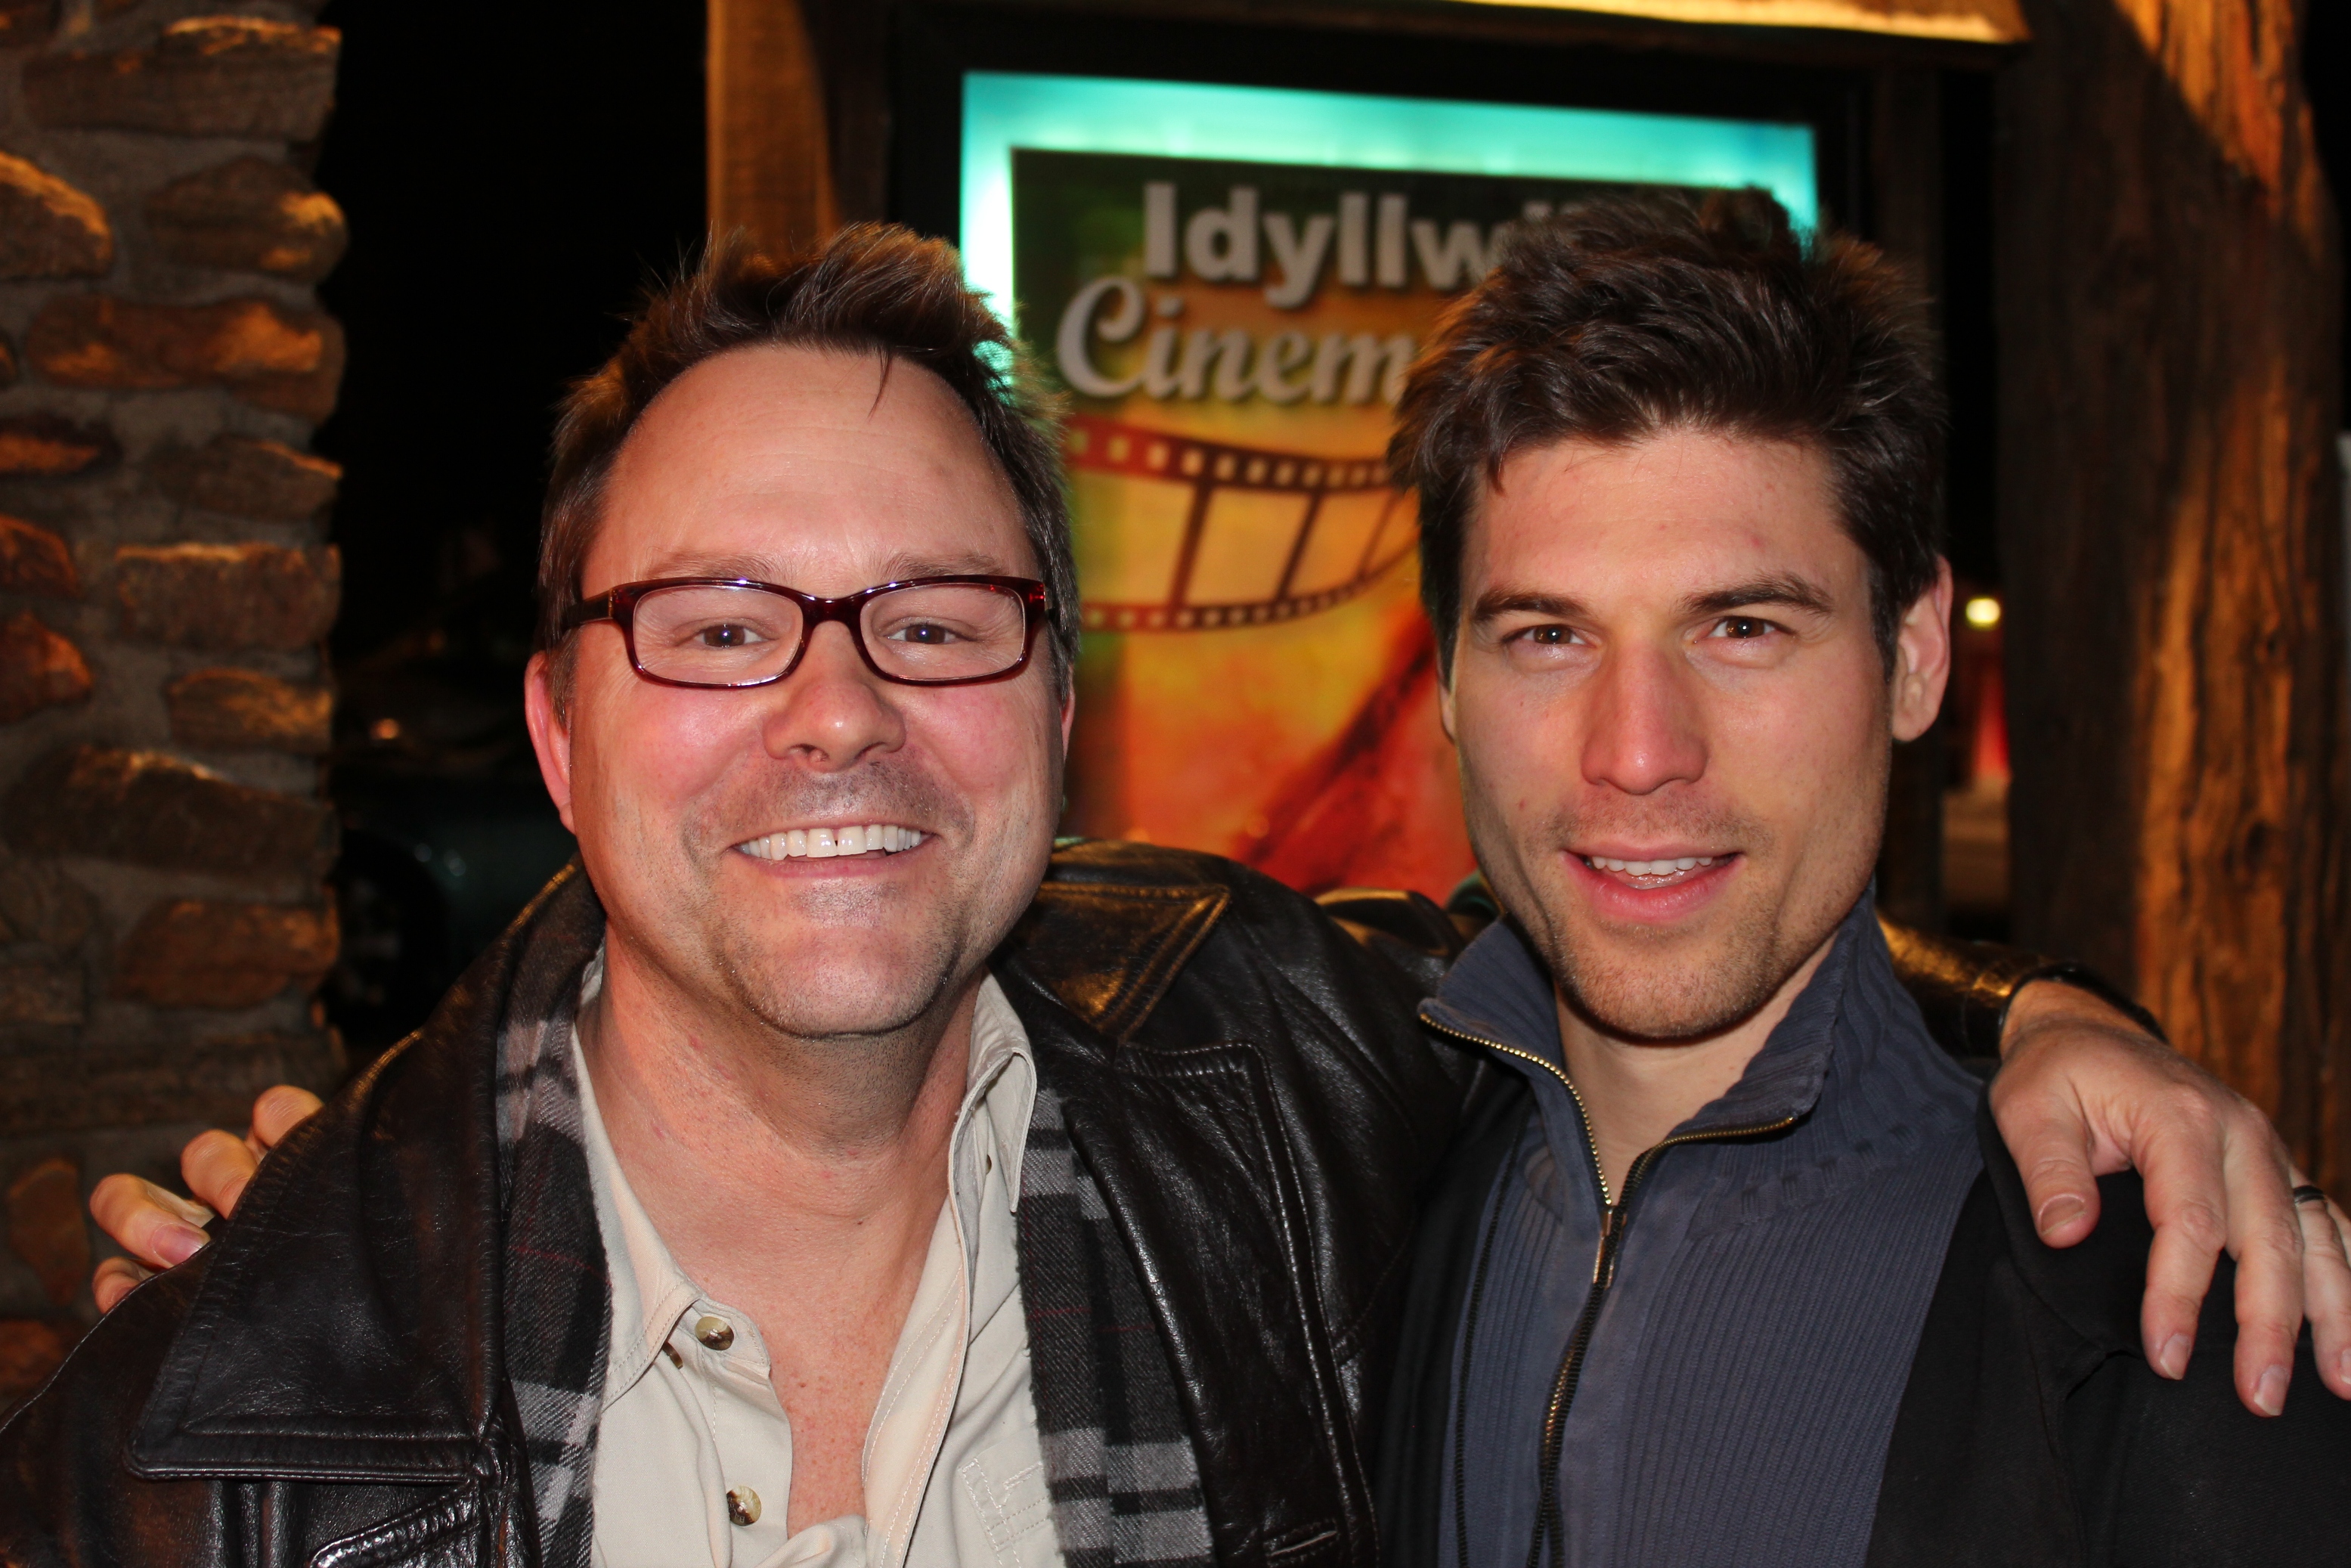 With Will Wallace, Actor (The Tree of Life, The Thin Red Line) Filmmaker, and co-director of the Idyllwild festival.